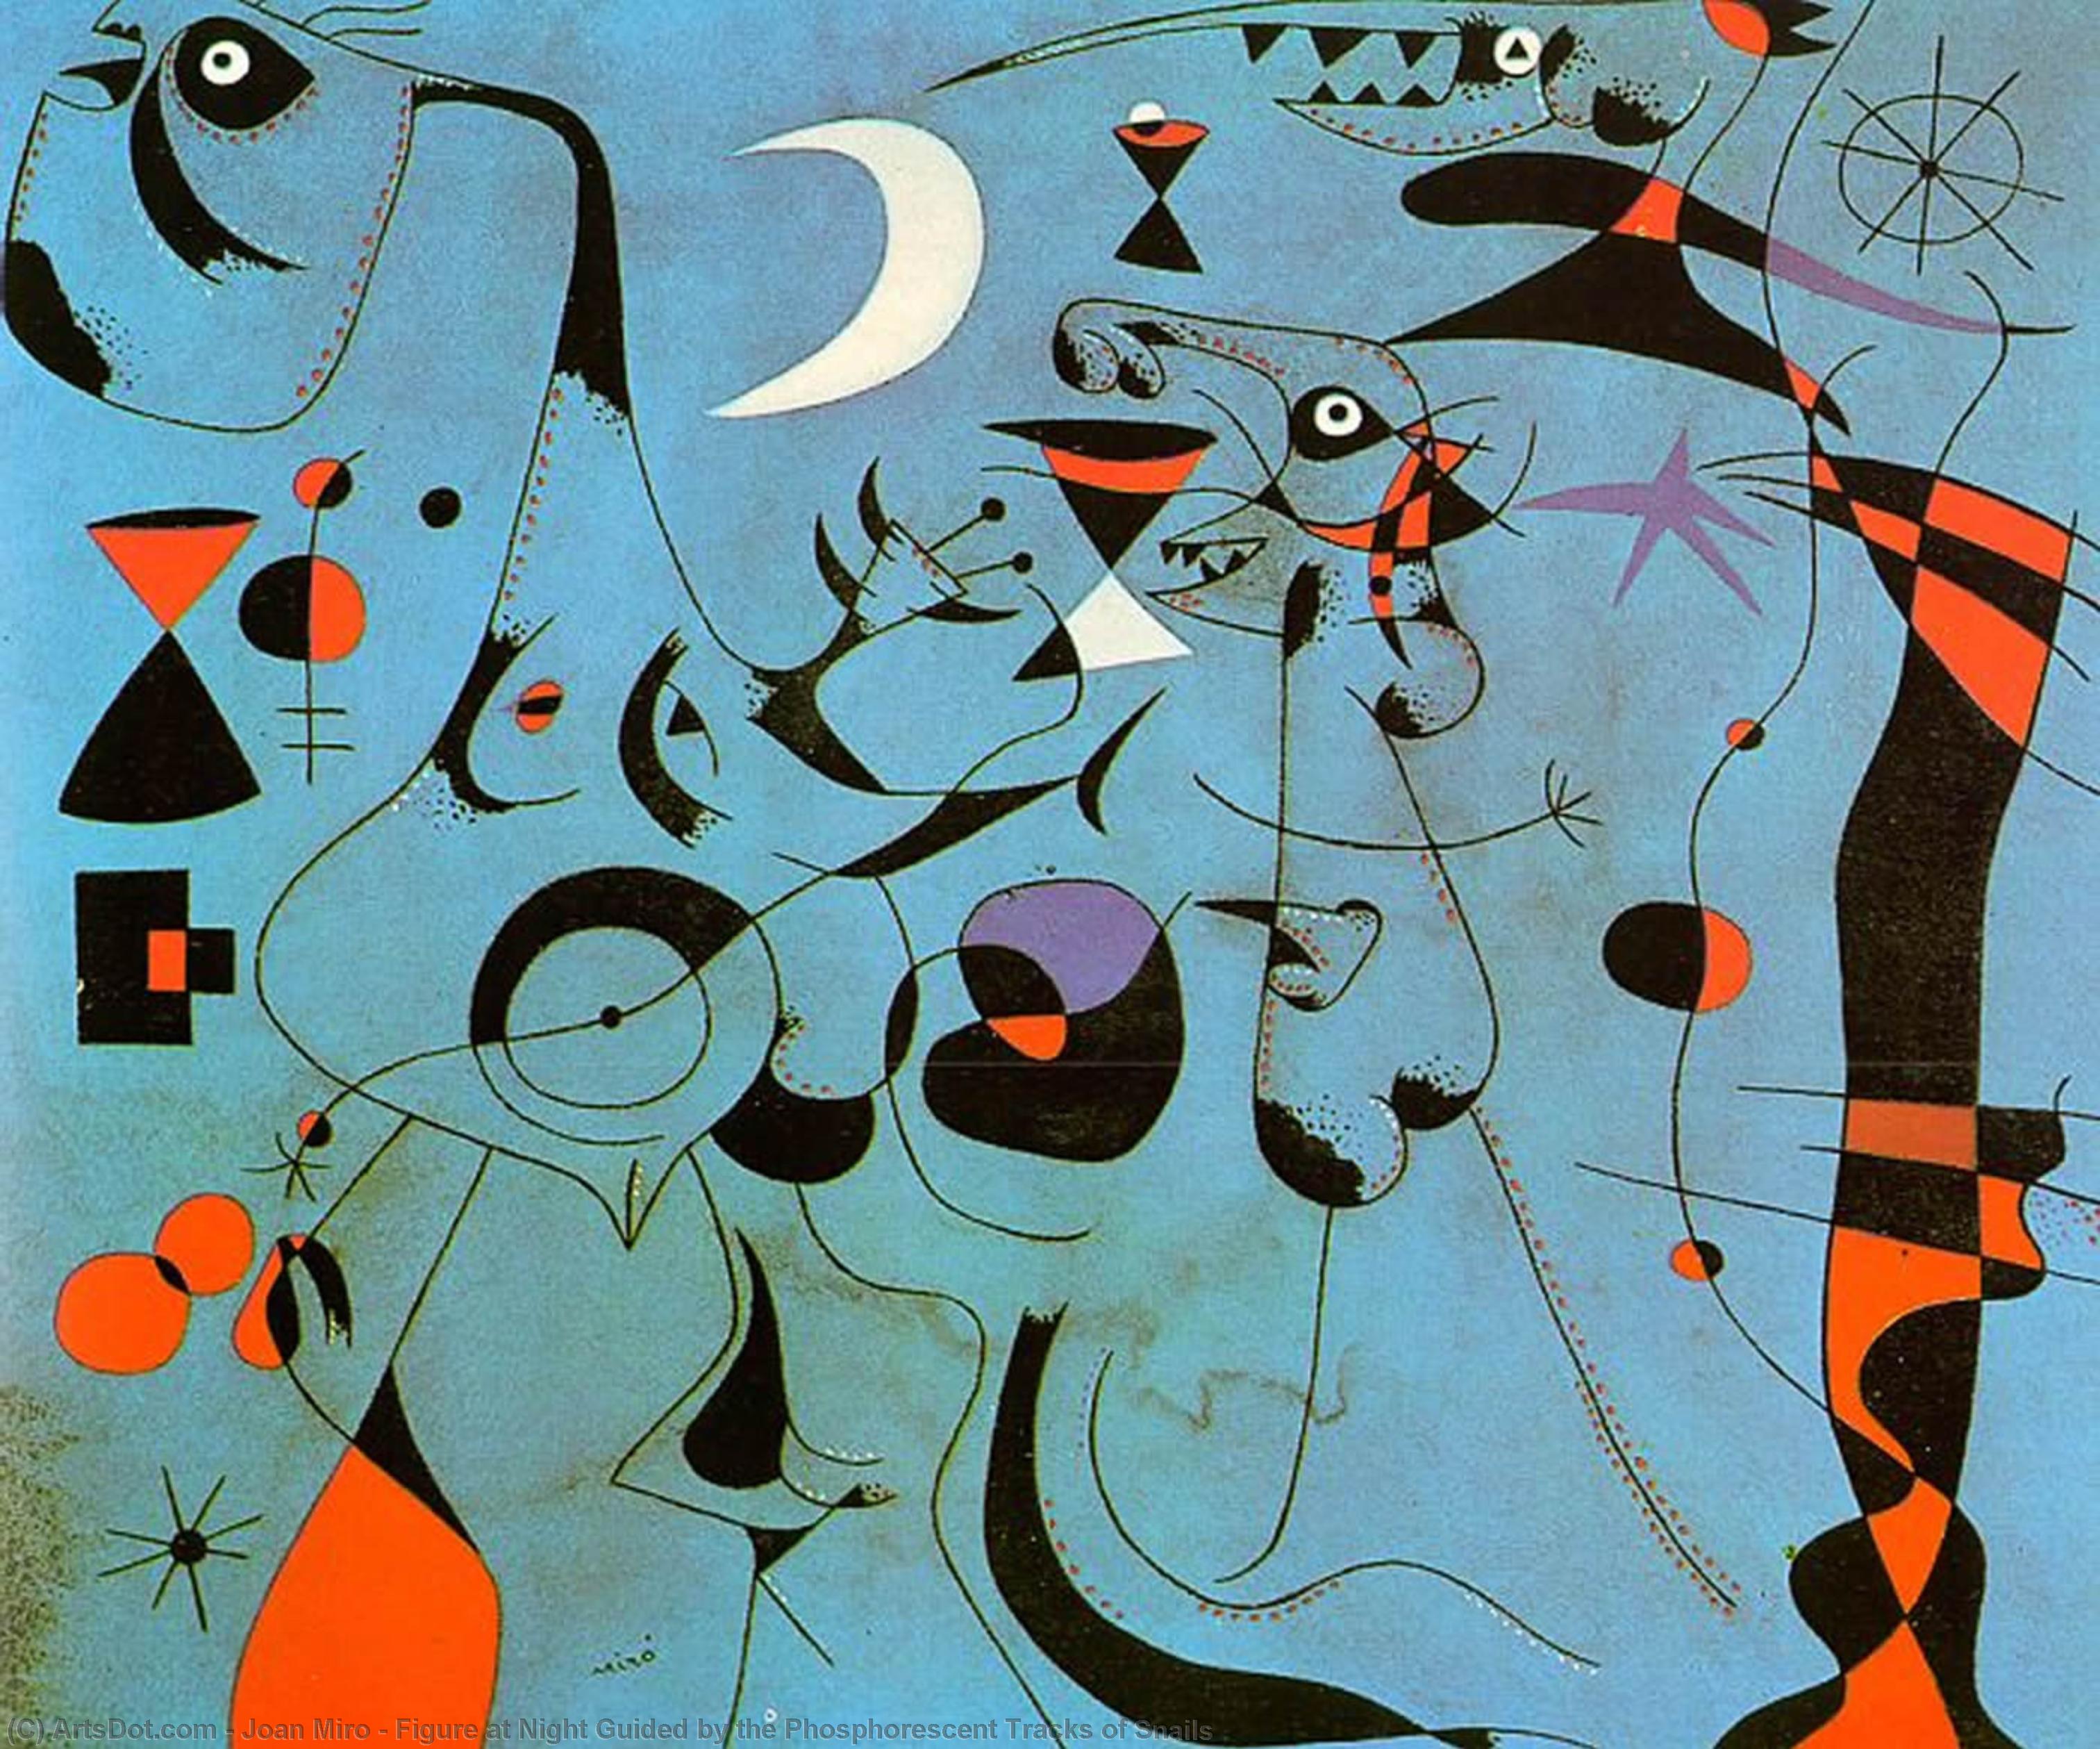 WikiOO.org - 백과 사전 - 회화, 삽화 Joan Miro - Figure at Night Guided by the Phosphorescent Tracks of Snails